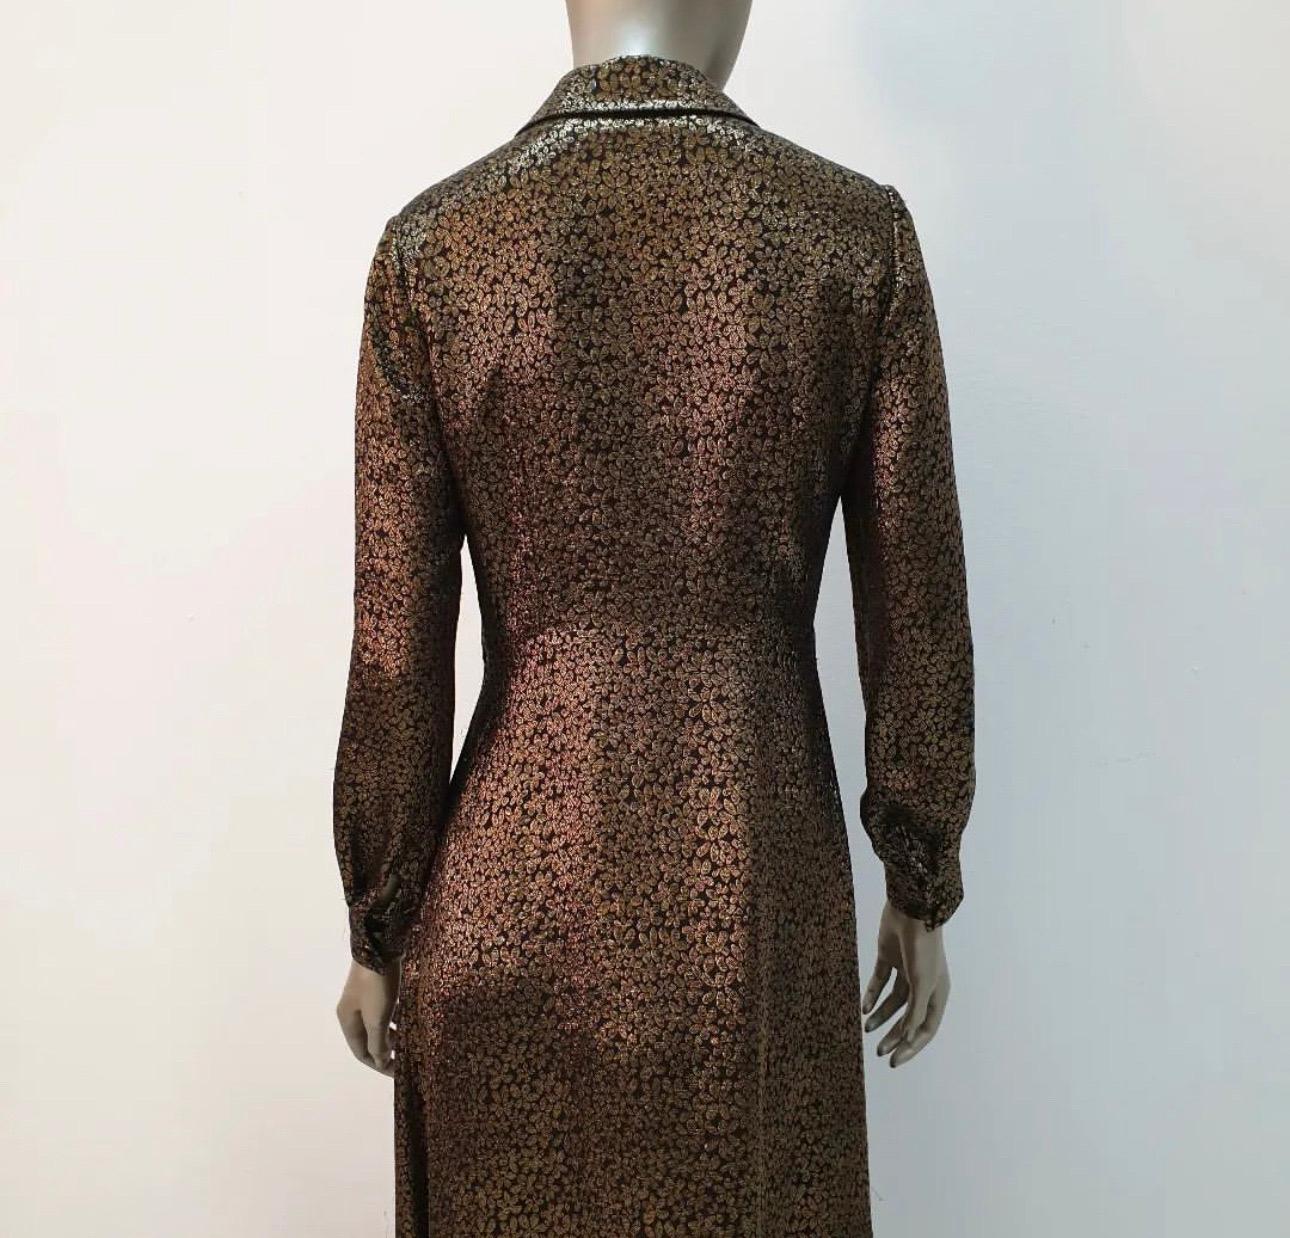 Stunning dres with gold floral print.
Sz.40
Very good condition.